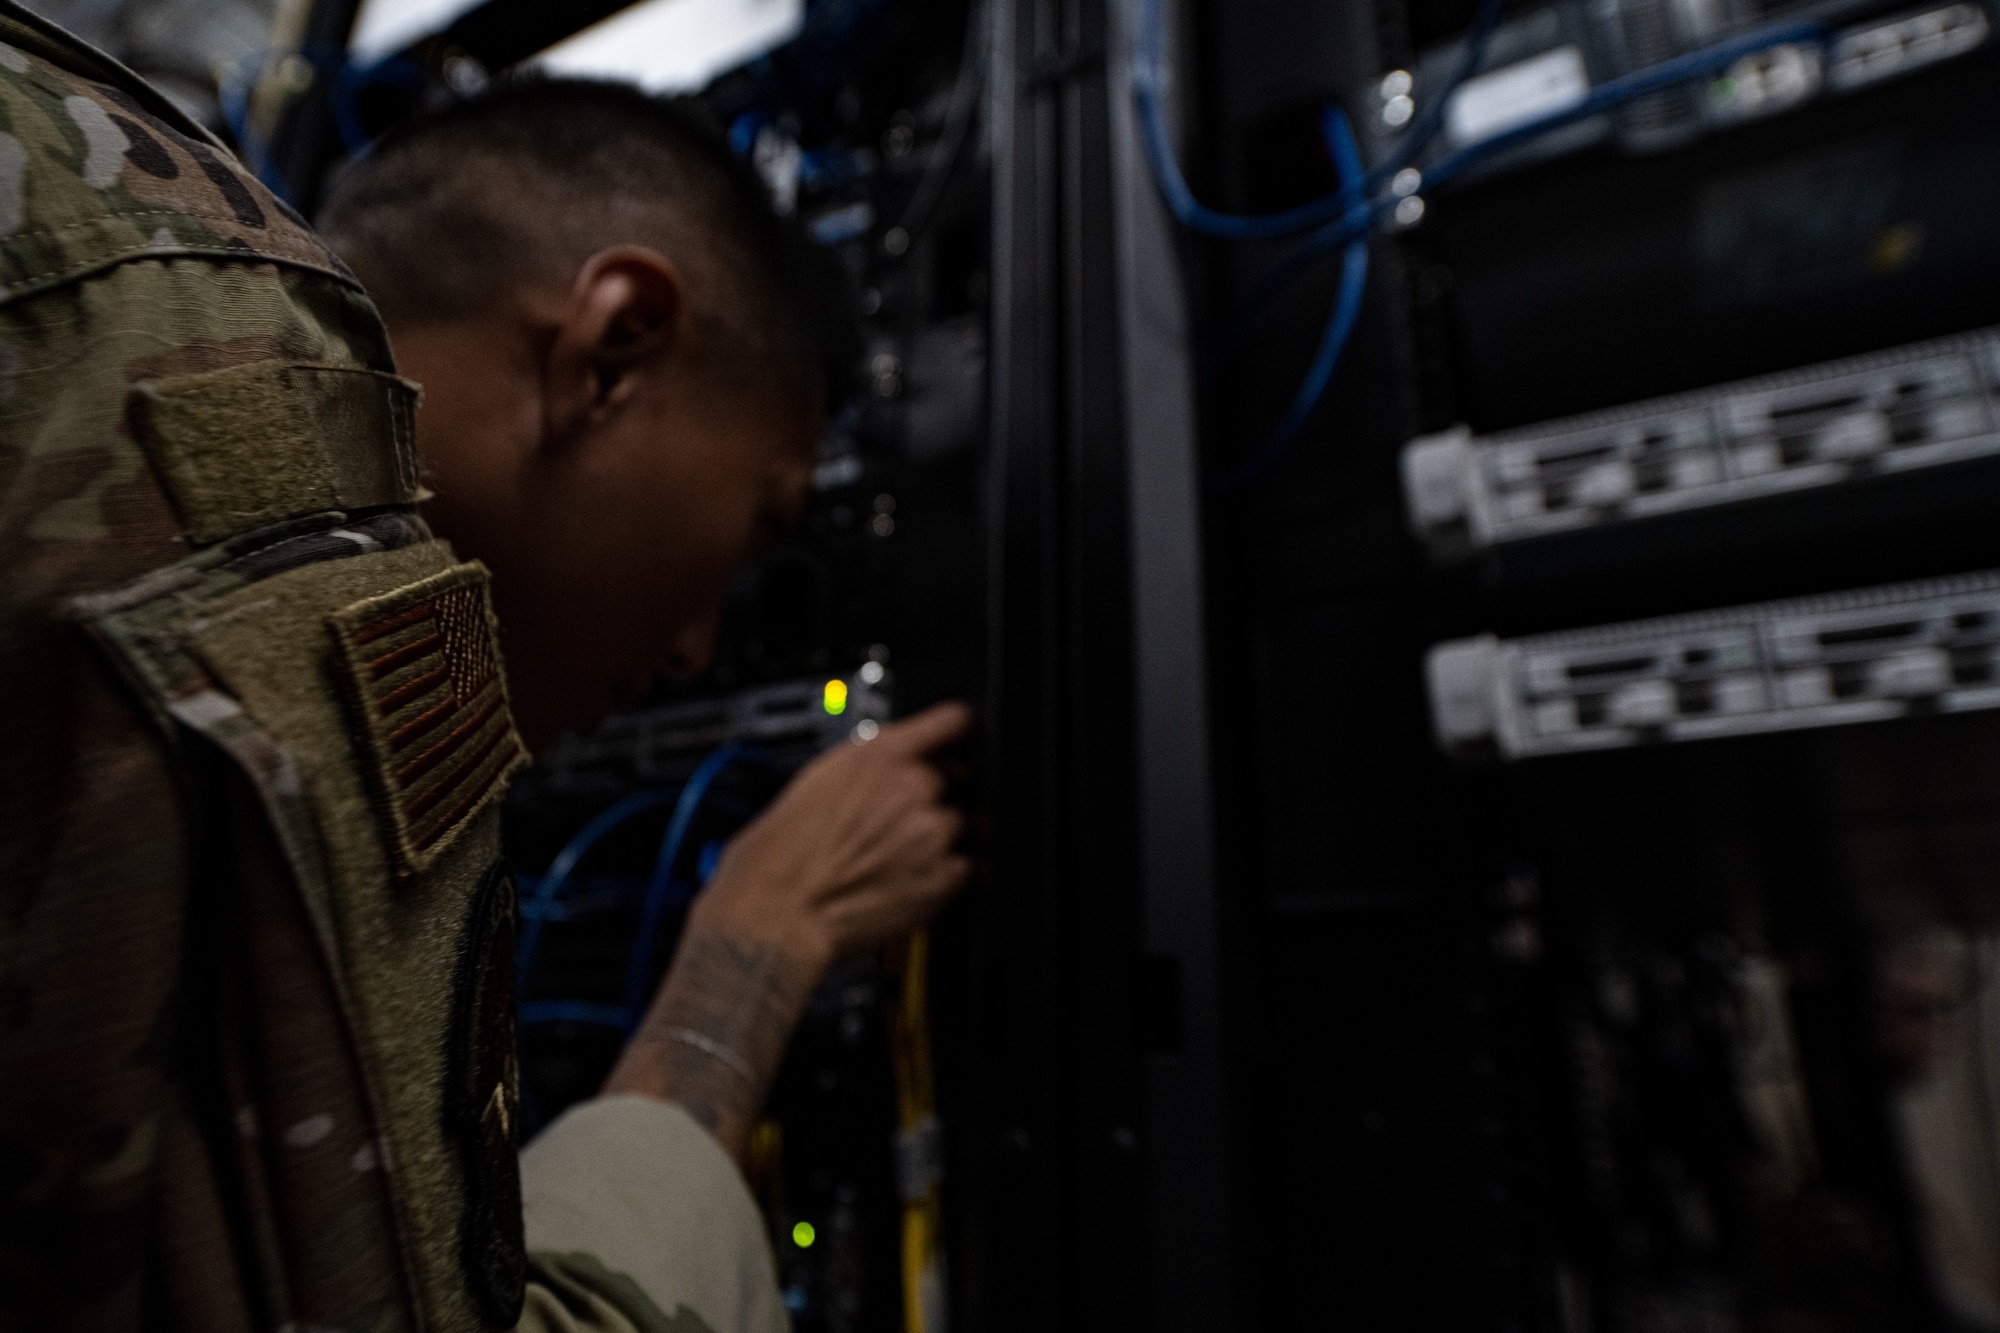 Network infrastructure technicians integrate and supervise network design, and configuration operations. (U.S. Air Force photo by Airman 1st Class Derrick Bole)